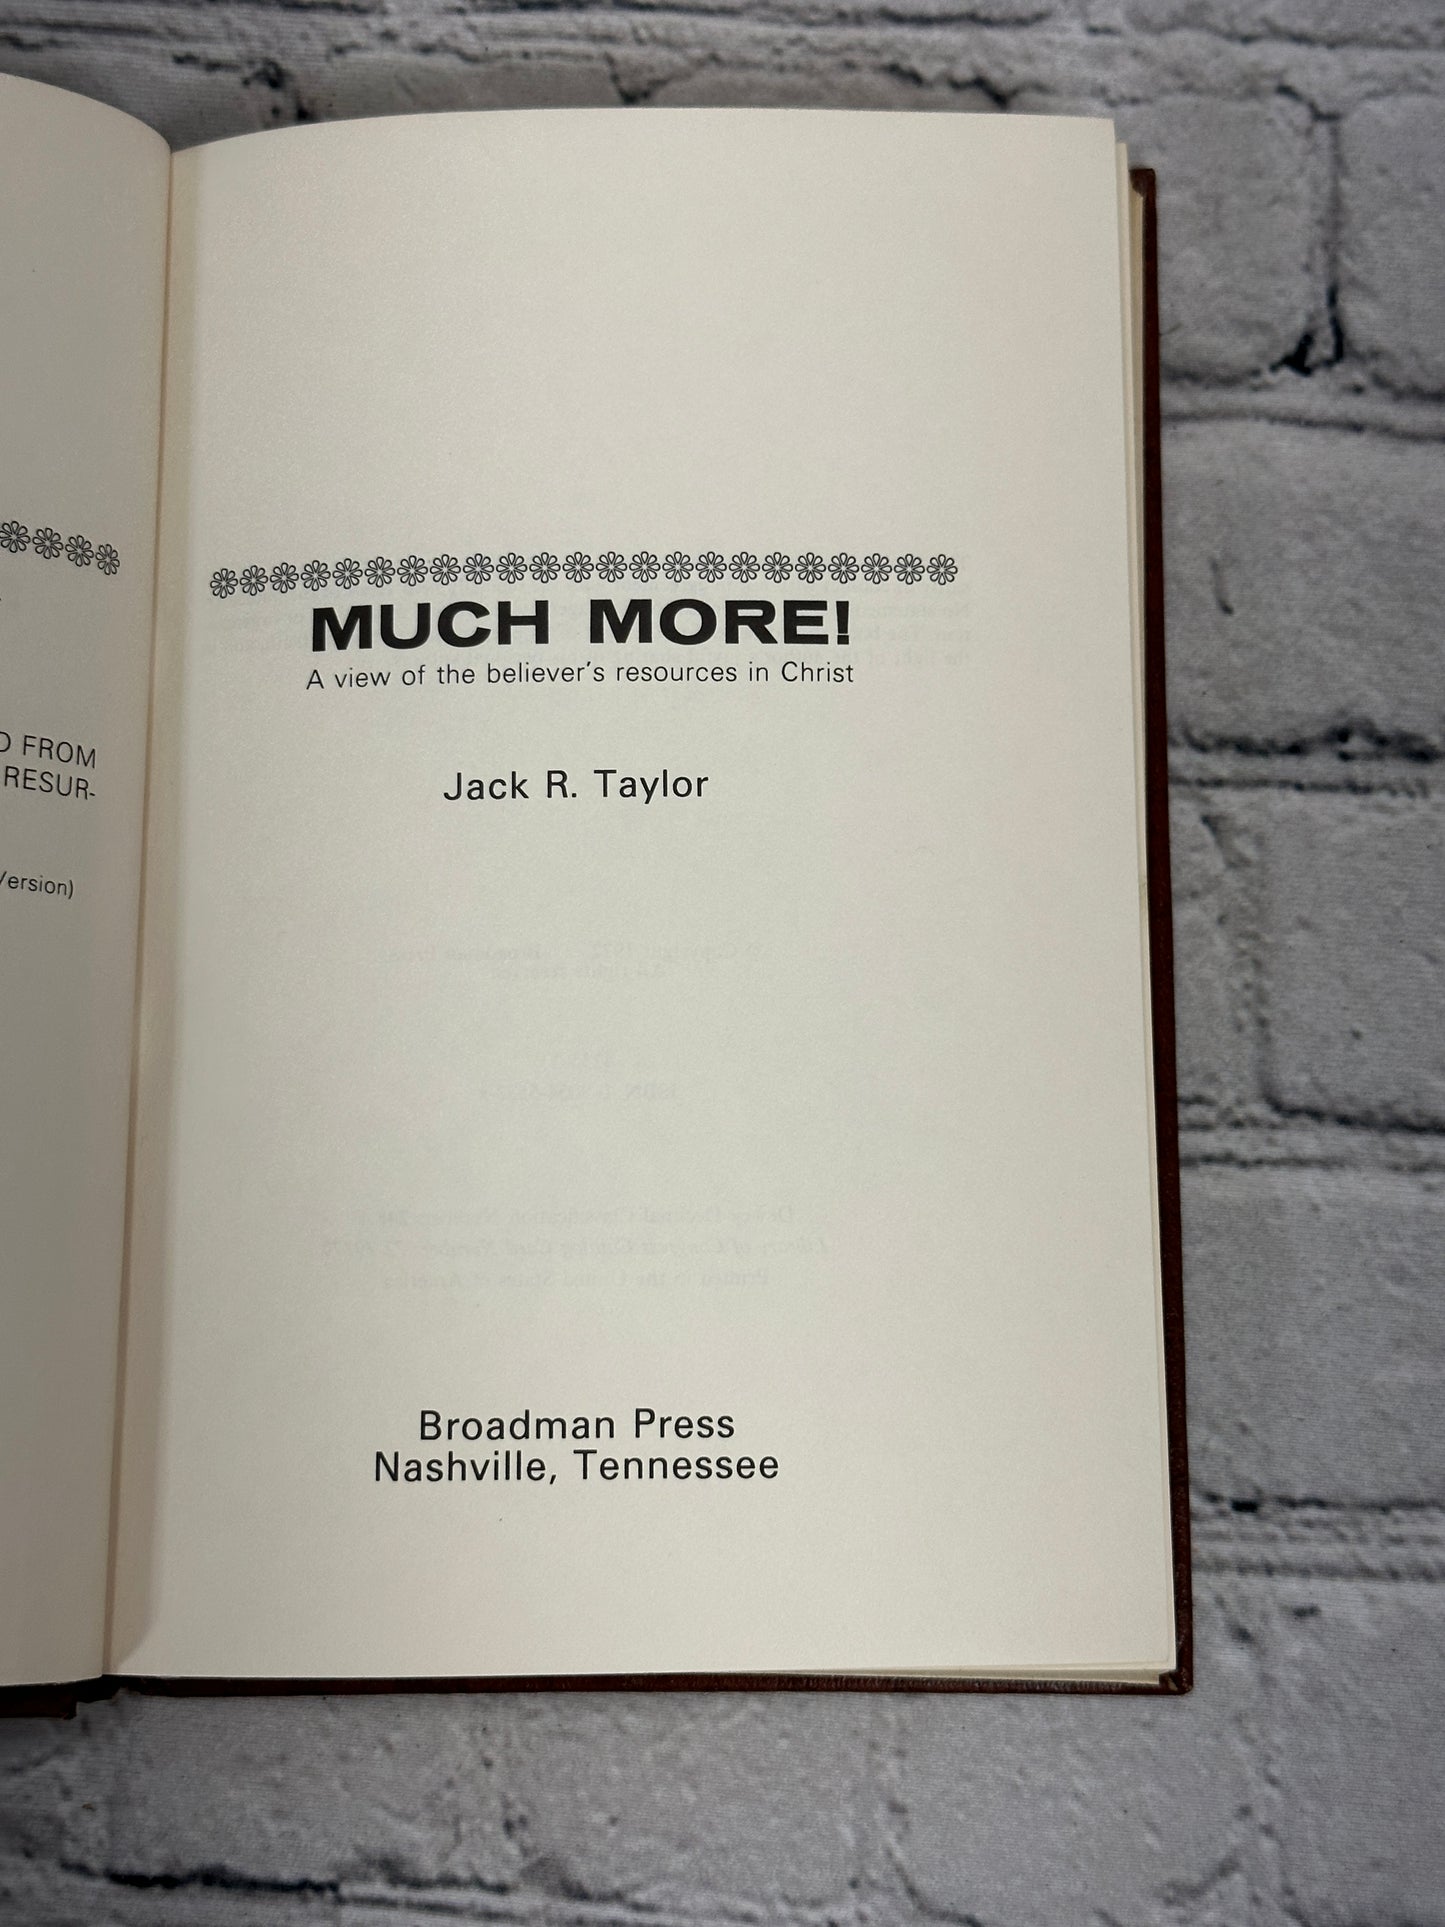 Much More! By Jack R. Taylor [1972]